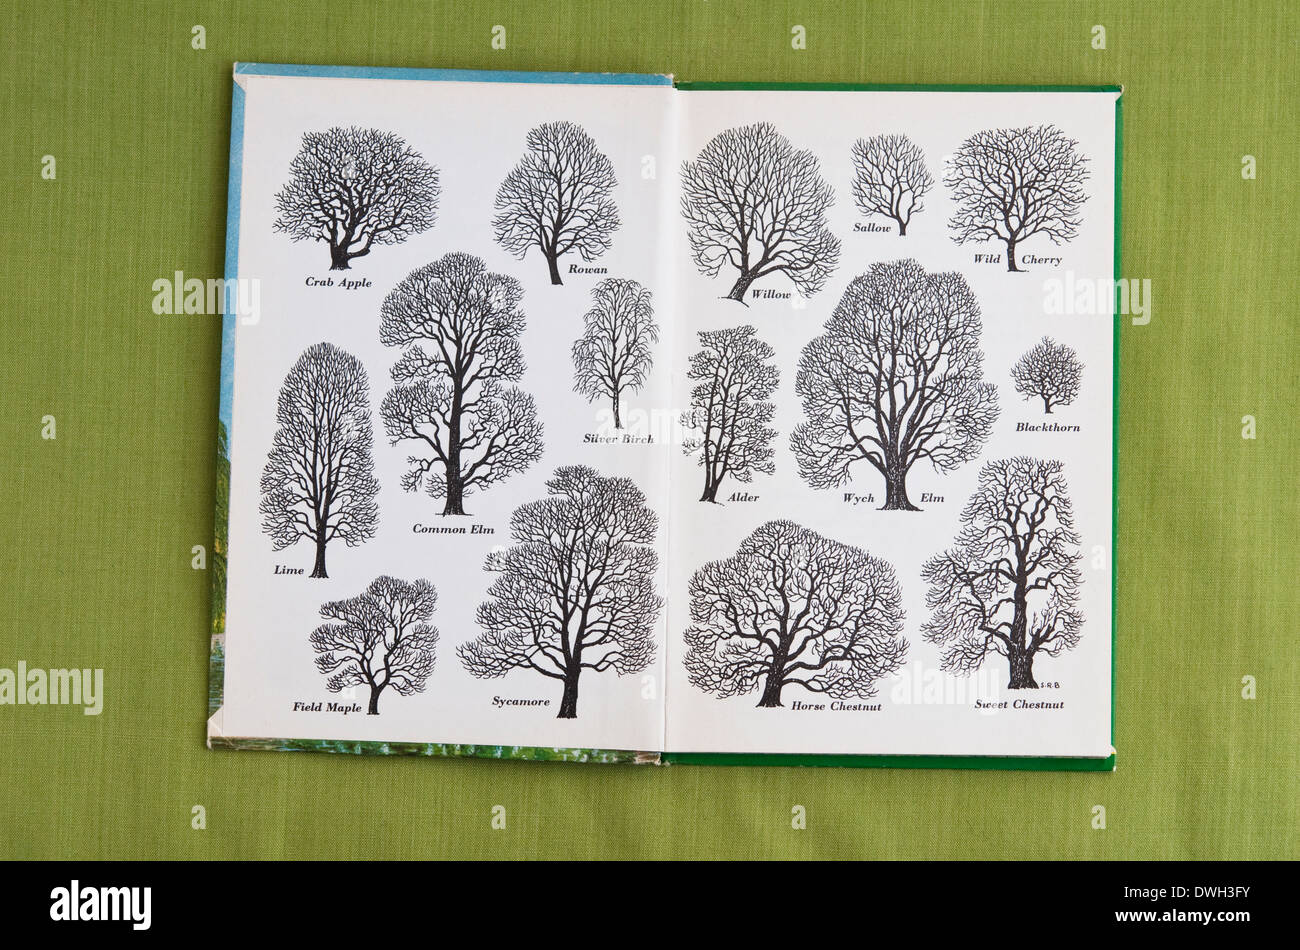 Outlines of Trees as drawn in ink by S R Badmin - printed on the inside front cover of 'Trees' a 1963 Ladybird Book. UK. Stock Photo